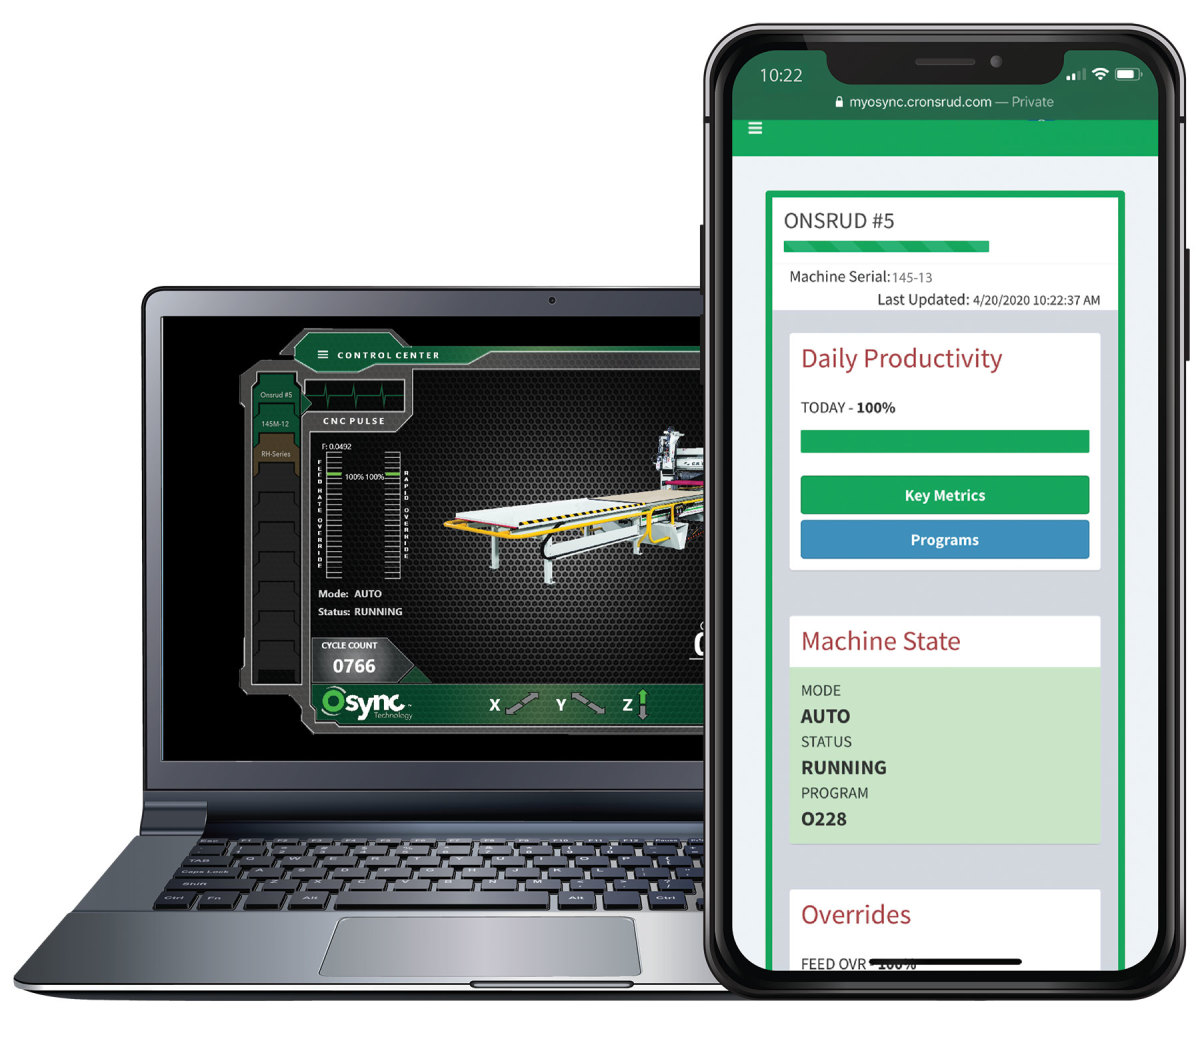 Osync Machine Analytics software from C.R. Onsrud allows shop owners to keep an eye on production and efficiencies while away from the shop.